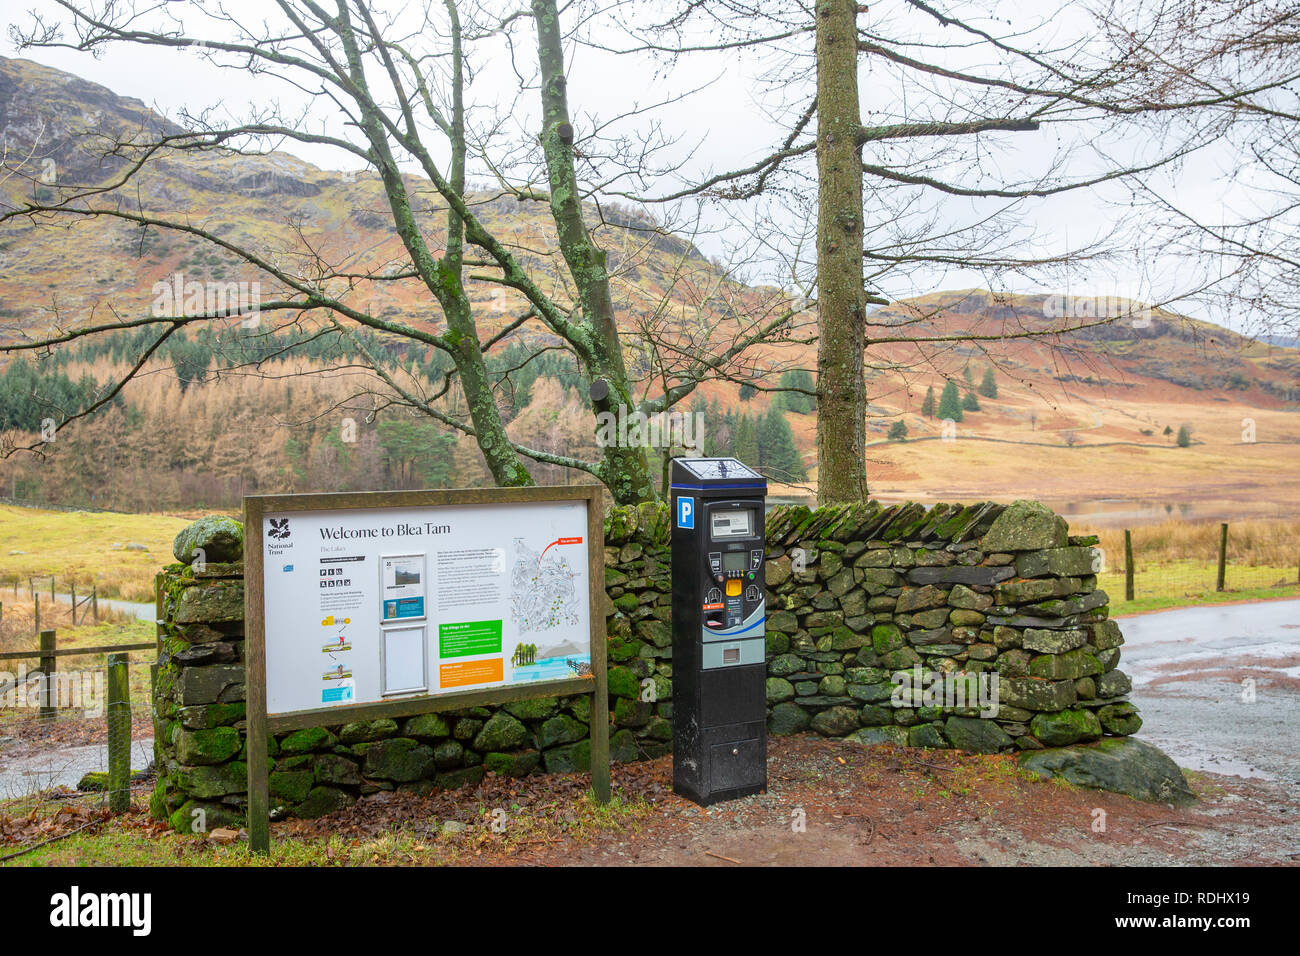 Car park and parking meter at Blea Tarn in the Lake District,Cumbria,England Stock Photo